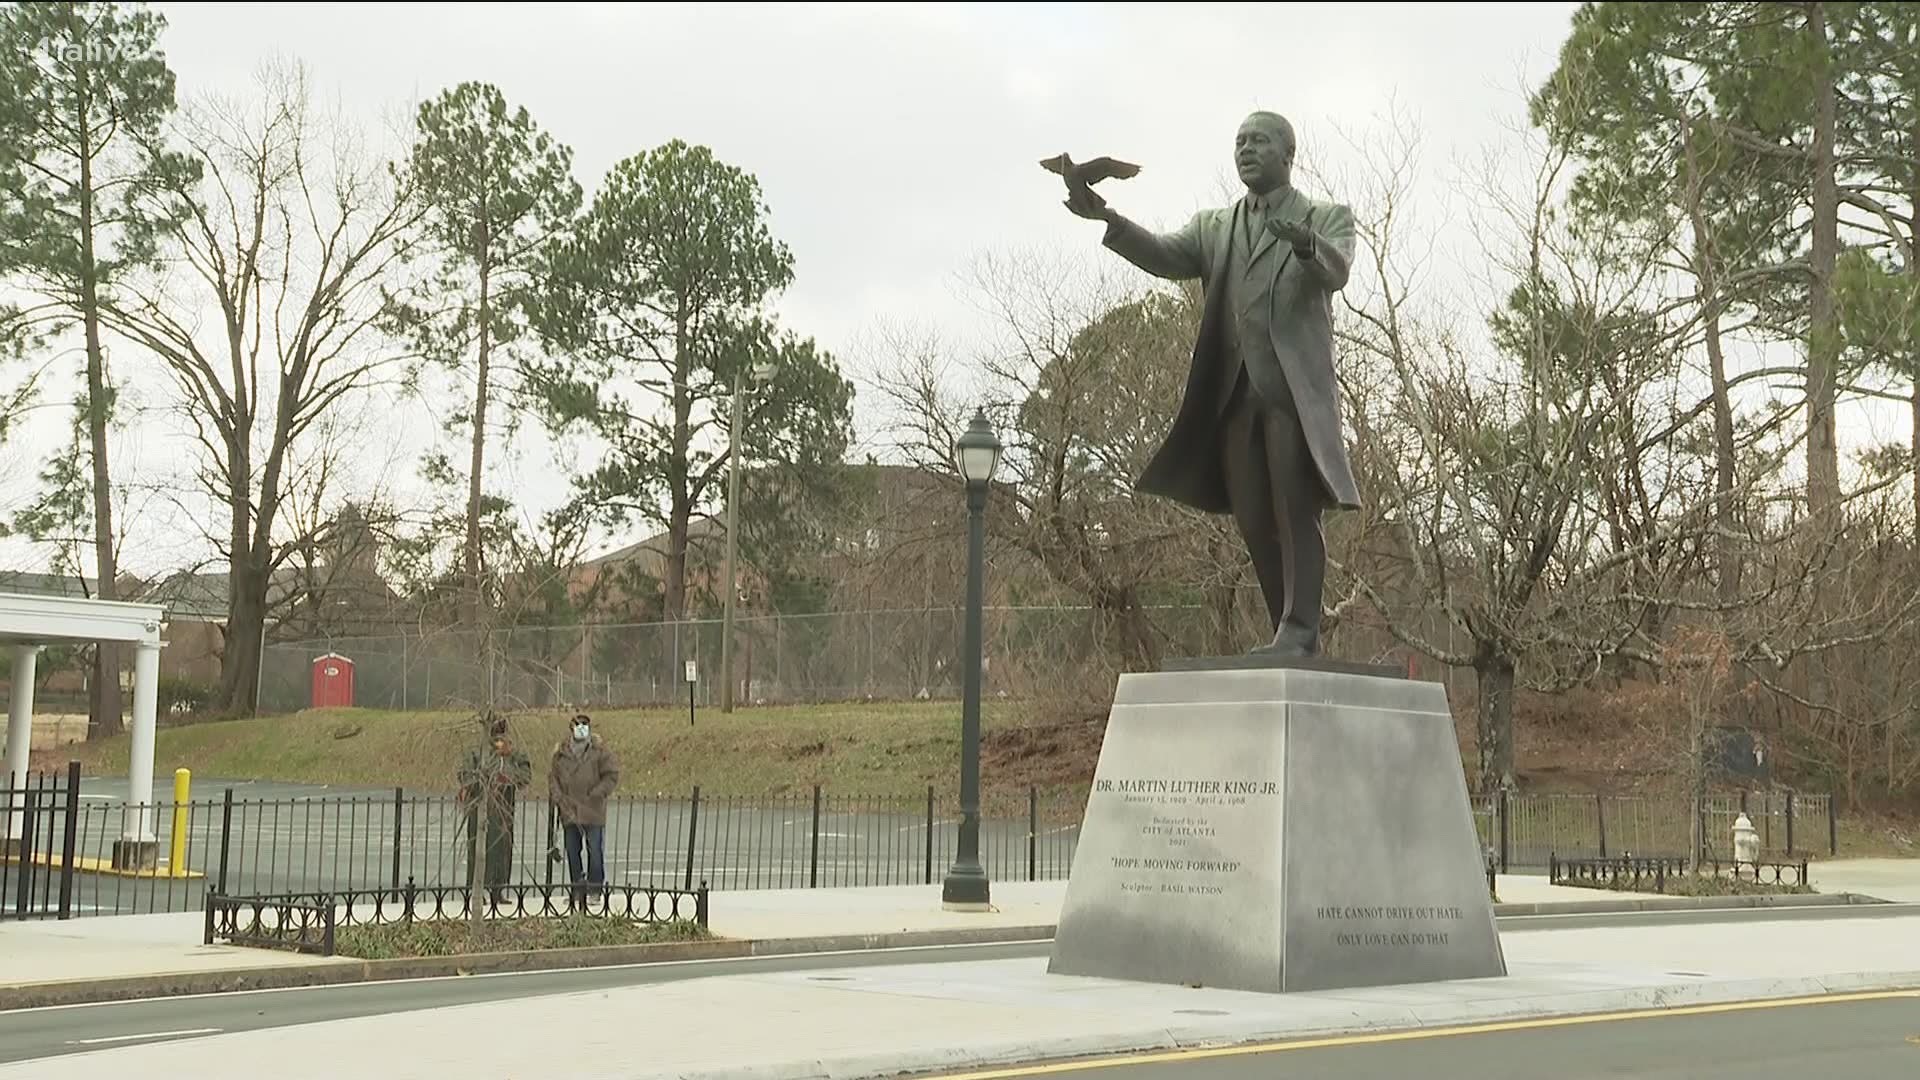 The 12-foot bronze statue stands on a 6-foot granite pedestal inscribed with famous quotes made by the Atlanta pastor and civil rights leader.